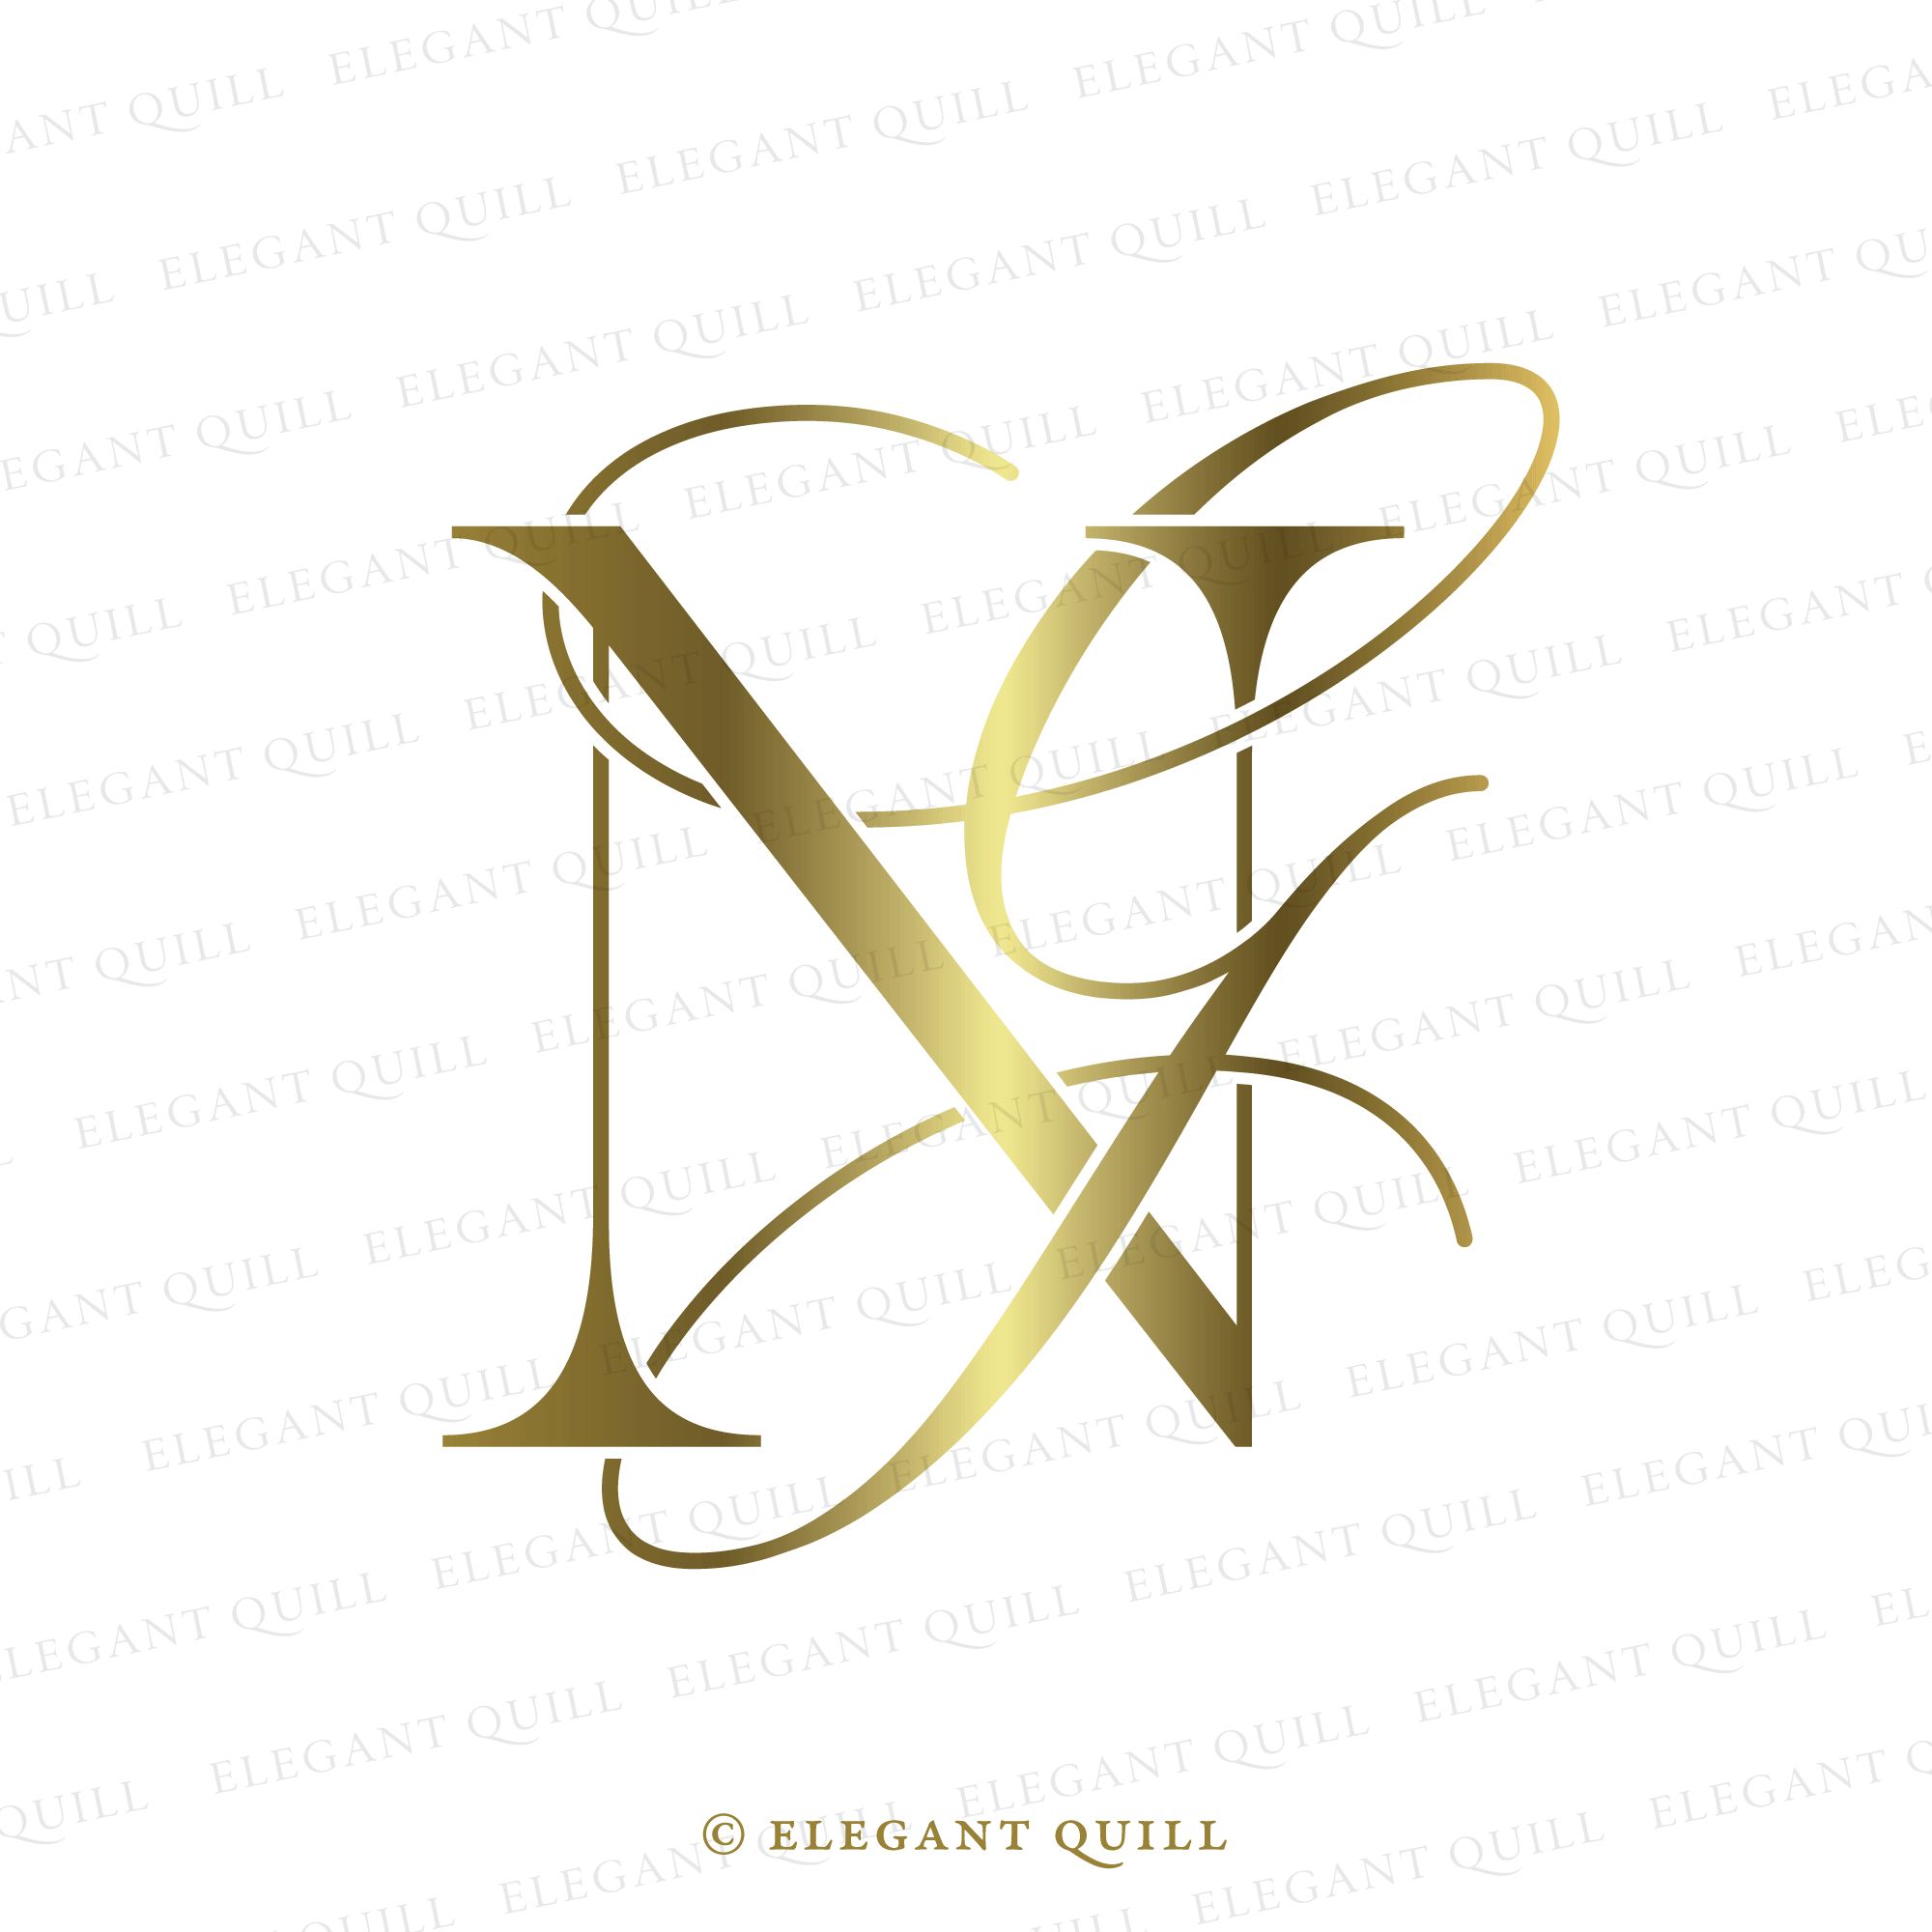 Gn g n letter modern logo design with yellow Vector Image